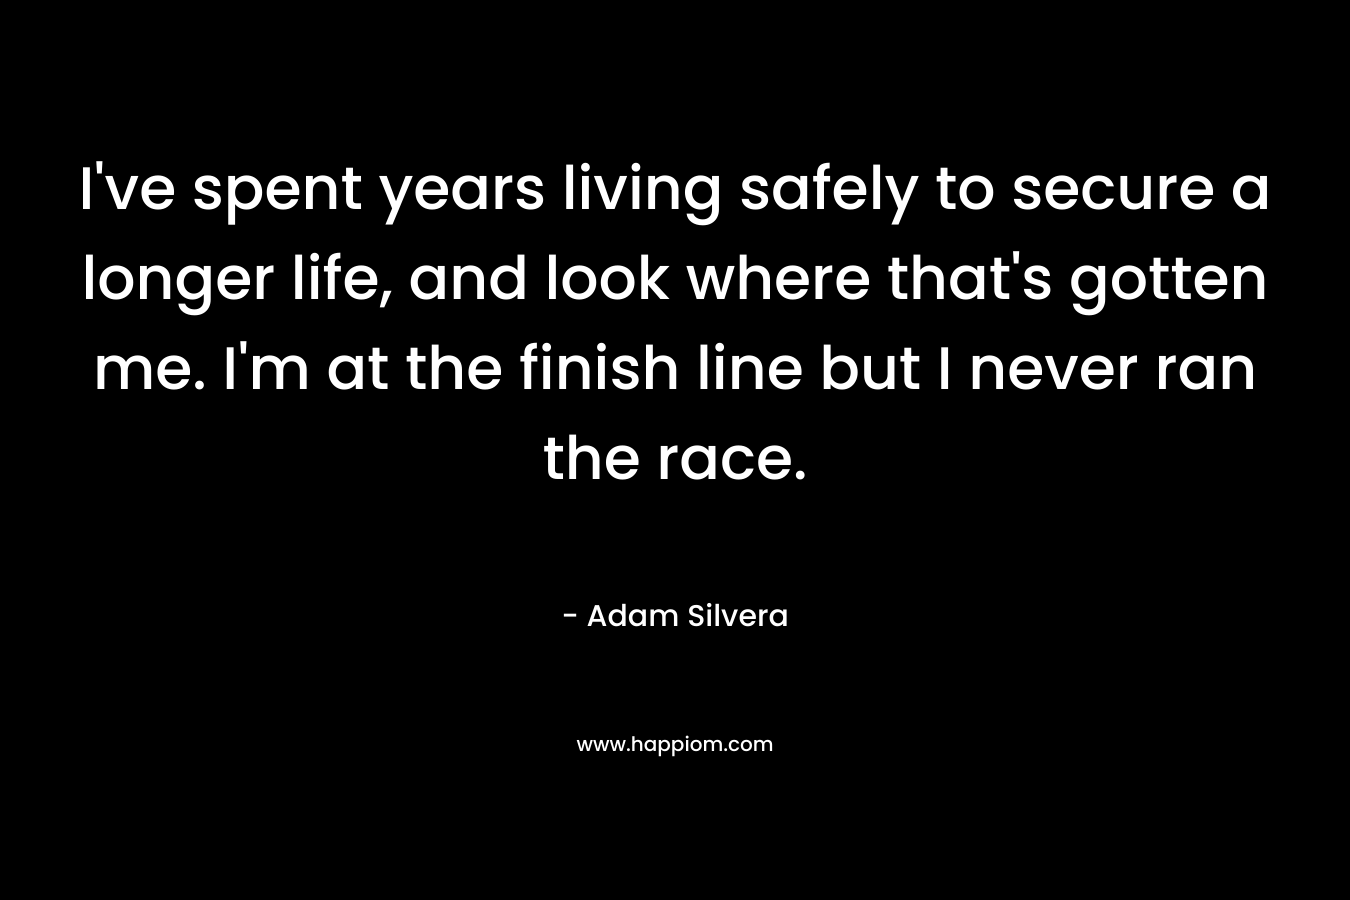 I've spent years living safely to secure a longer life, and look where that's gotten me. I'm at the finish line but I never ran the race.